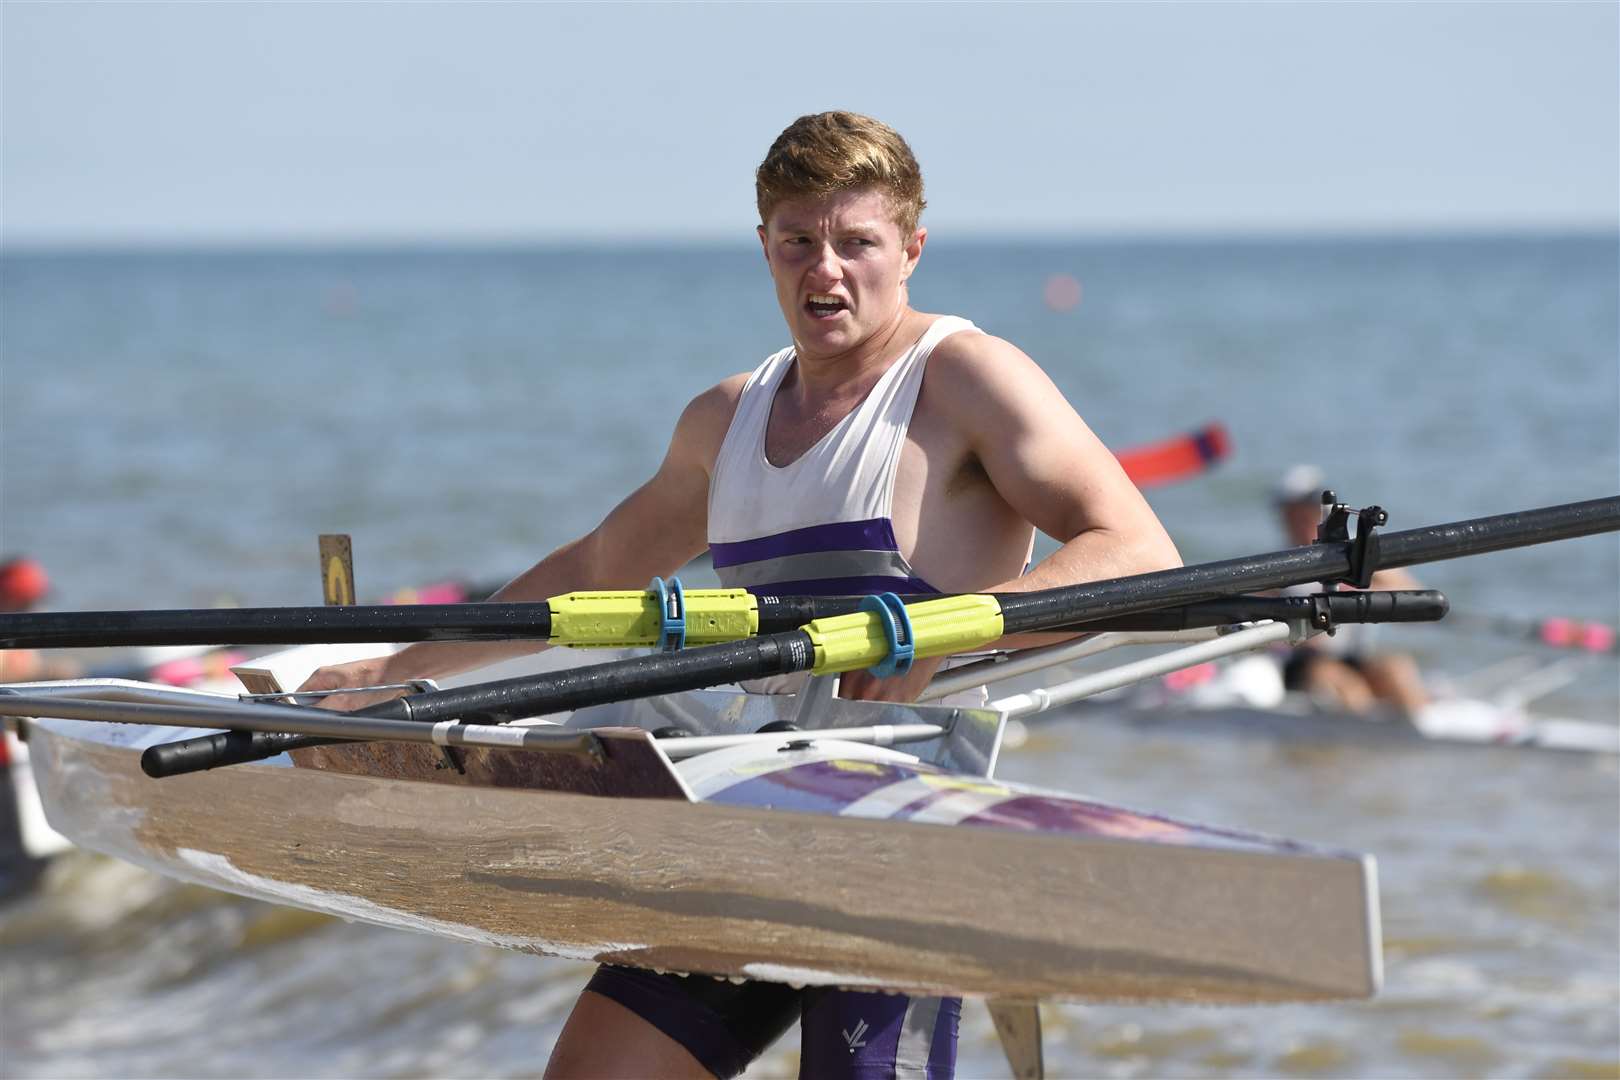 Will Dennis carries his boat to the water ahead of a Men's Senior Sculls race Picture: Tony Flashman